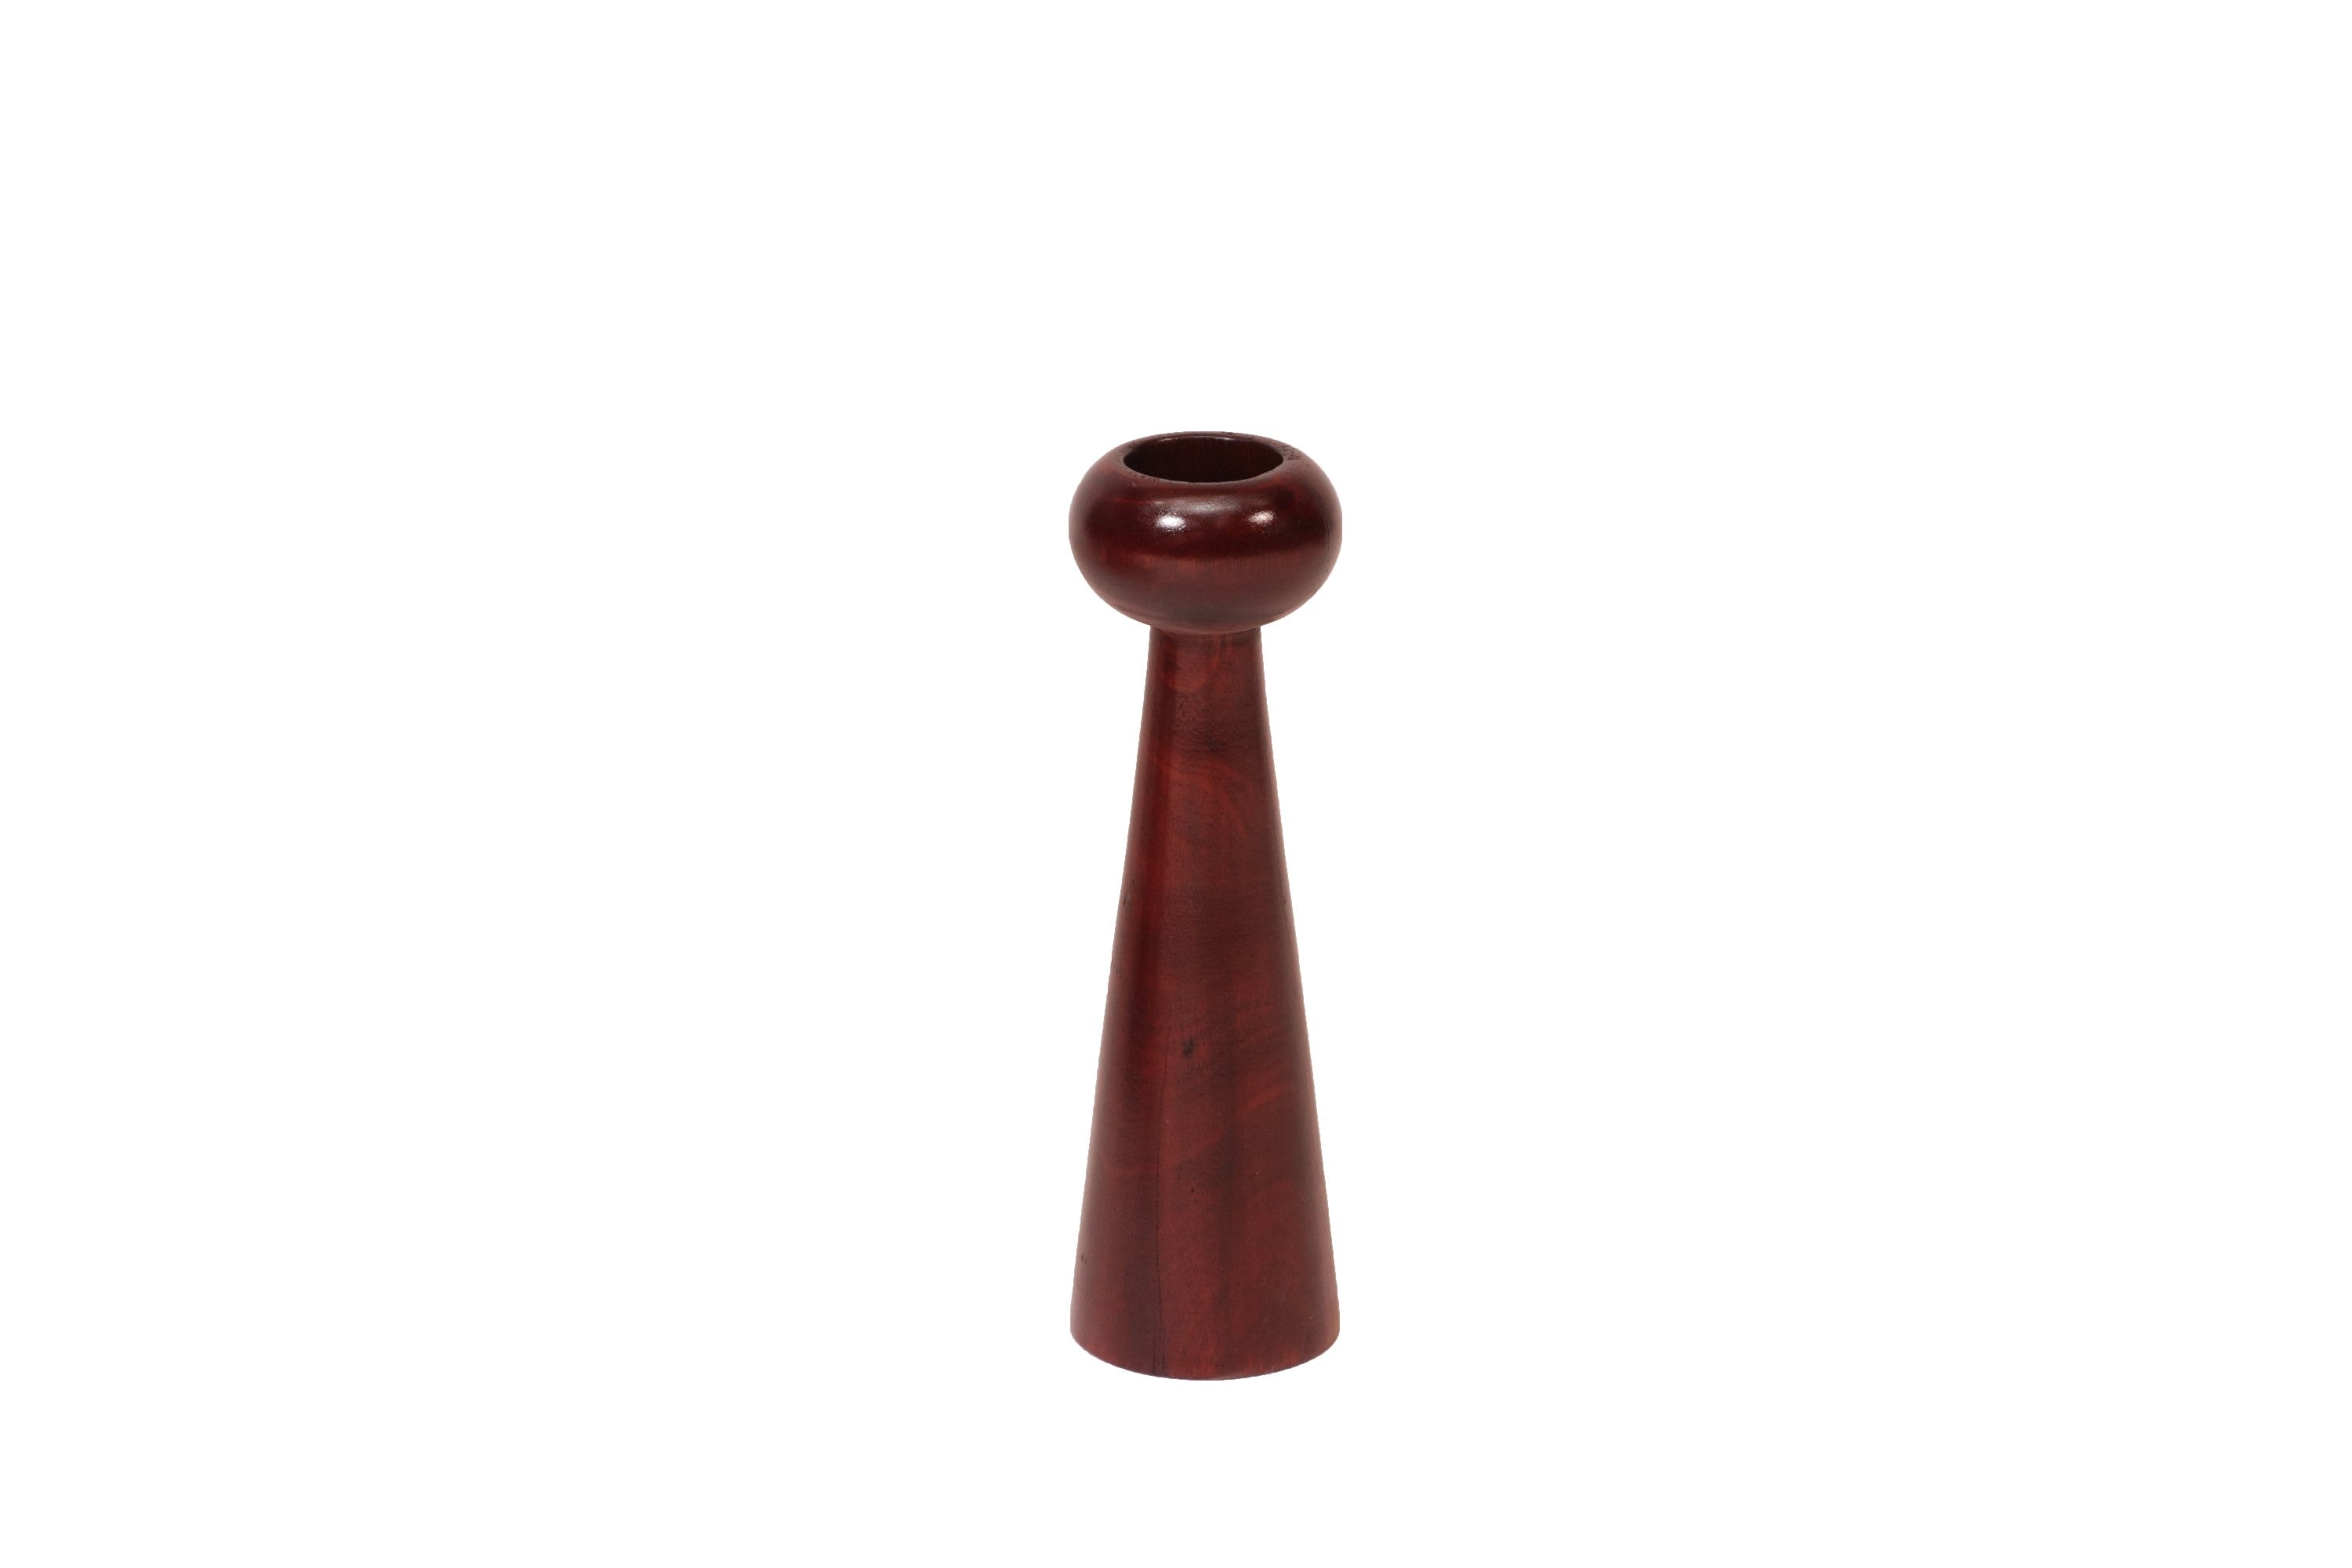 Solid Wood Candle Holder Small (3 x 3 x 10 Inch) Candle Holder